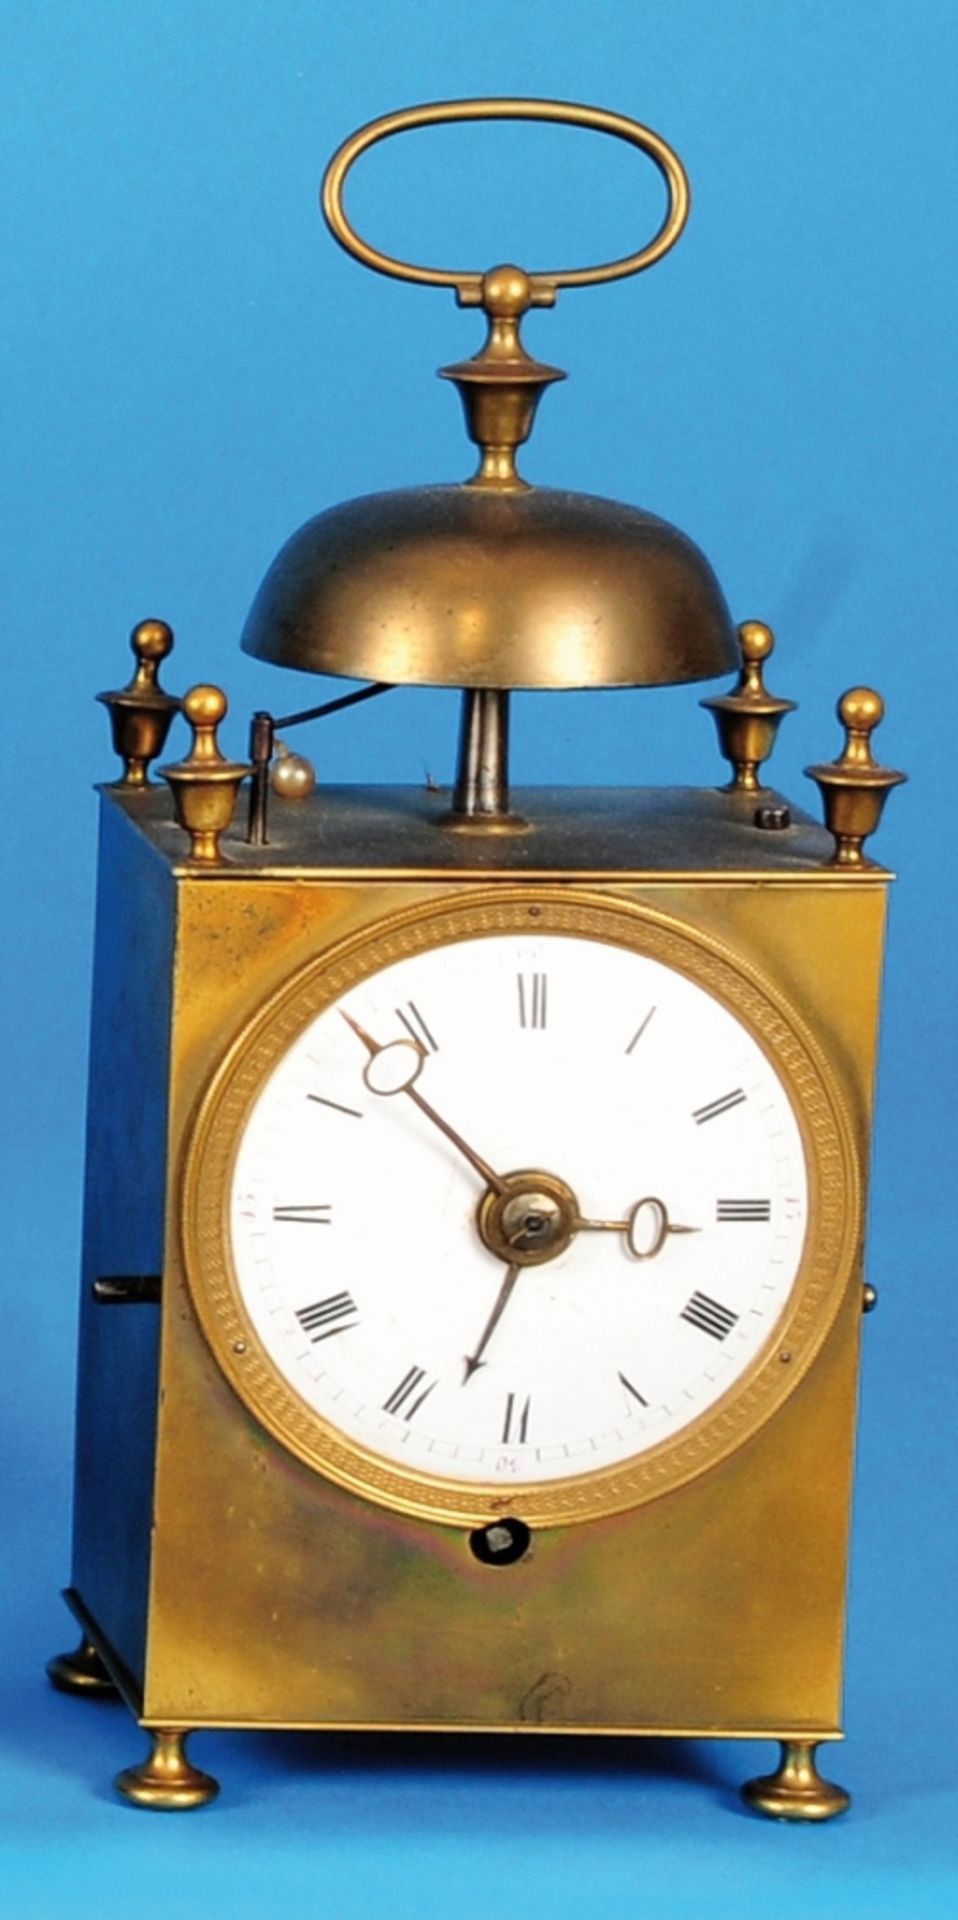 Small capucine with alarm clock via pulley winding system